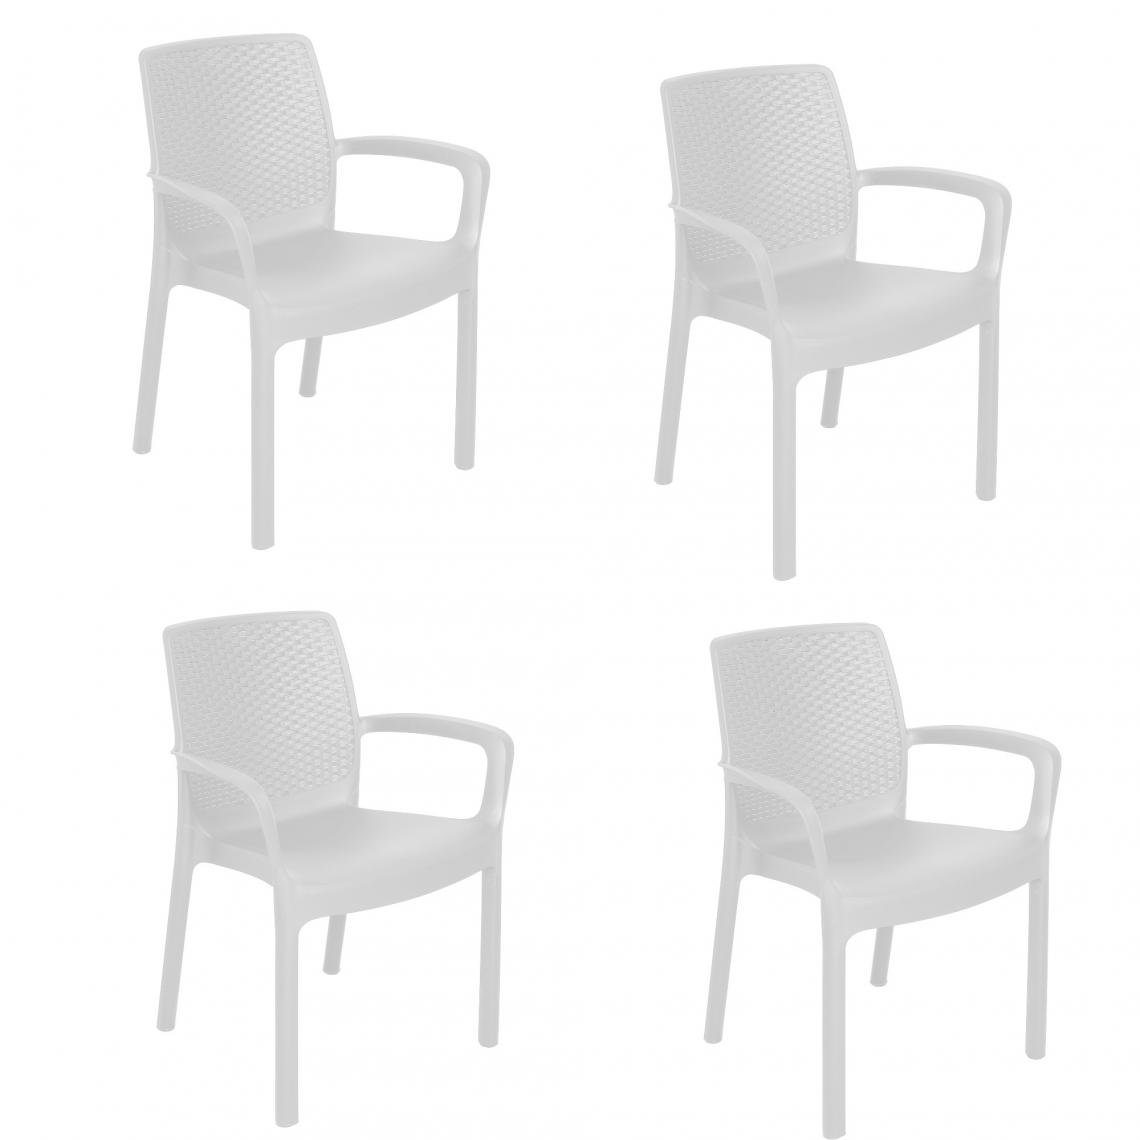 Alter - Ensemble de 4 chaises empilables effet rotin, Made in Italy, couleur blanche, Dimensions 54 x 82 x 60,5 cm - Chaises